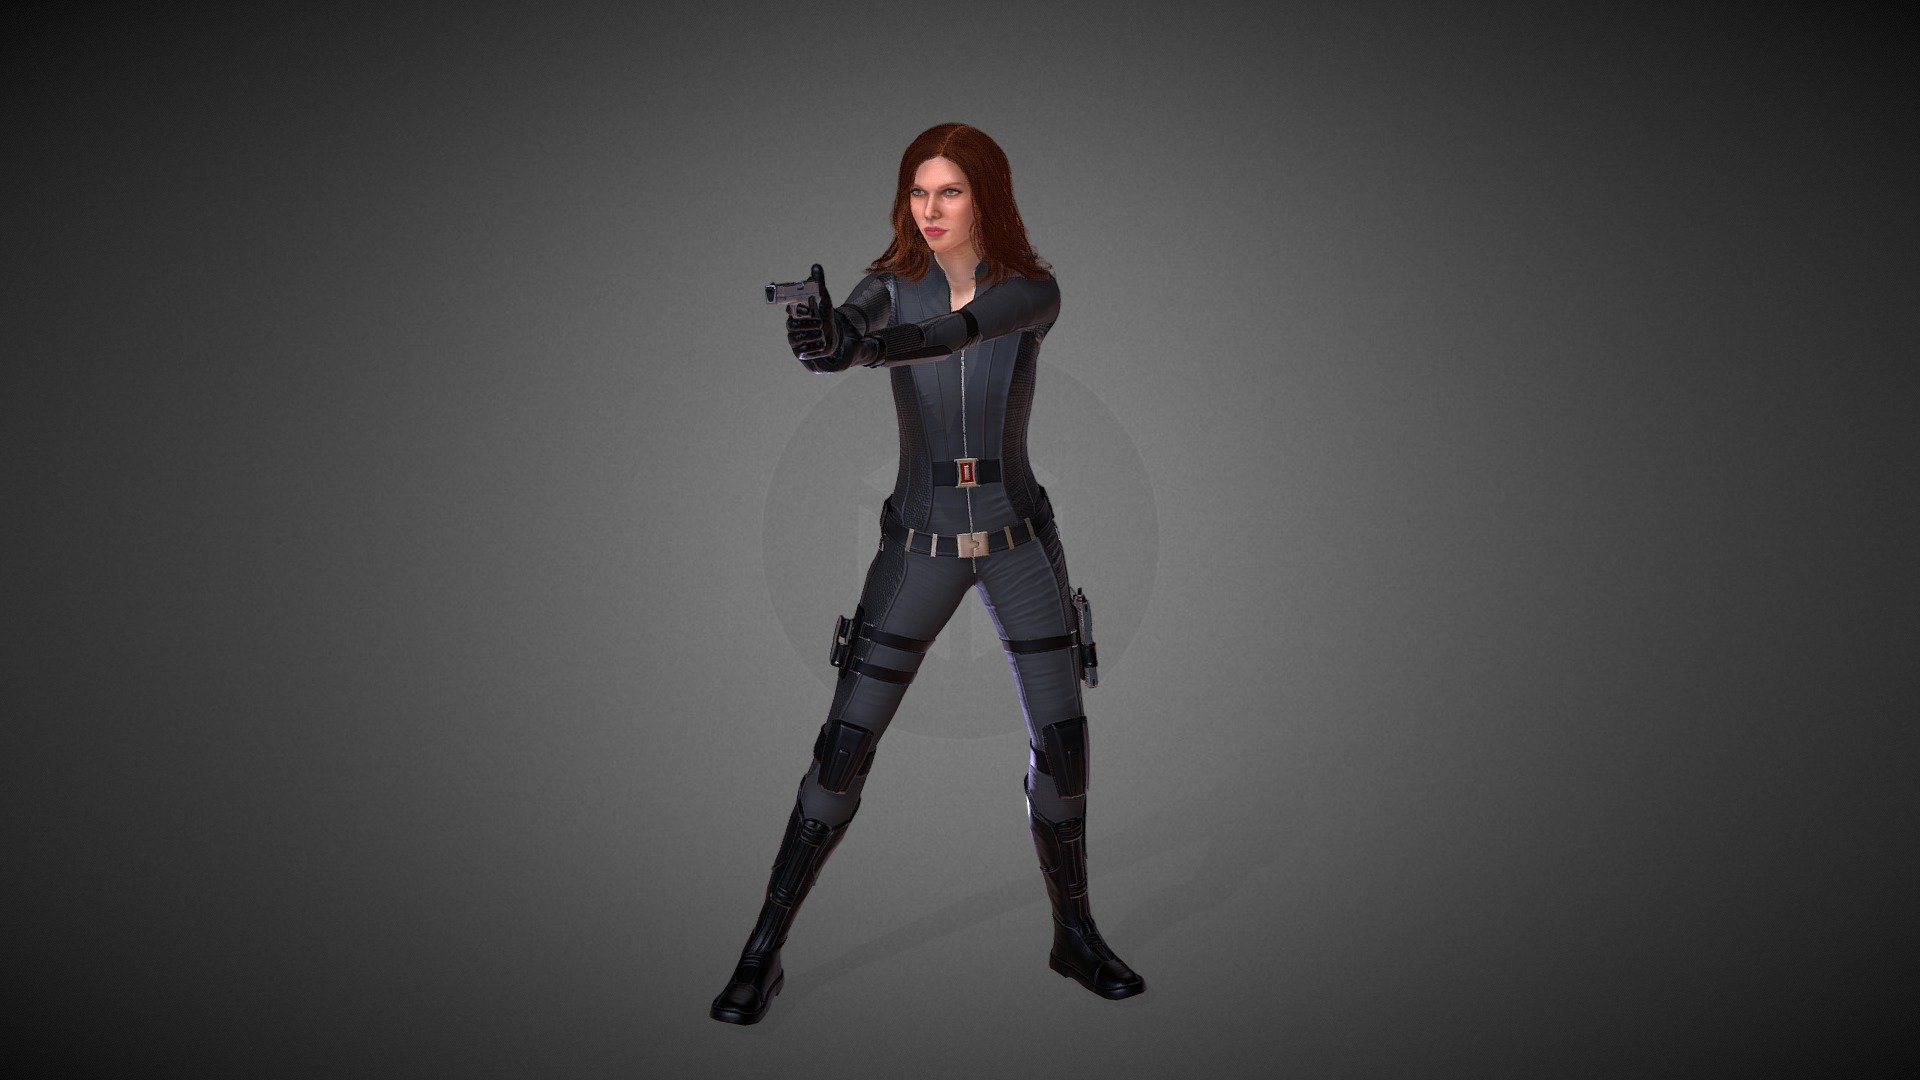 Here is my 3d model of Scarlett Johansson as Natasha Romanoff.
I did this RT character years ago inspired from the Captain America movie 2014
It's not one of my perfect works but still worth showing 3d model